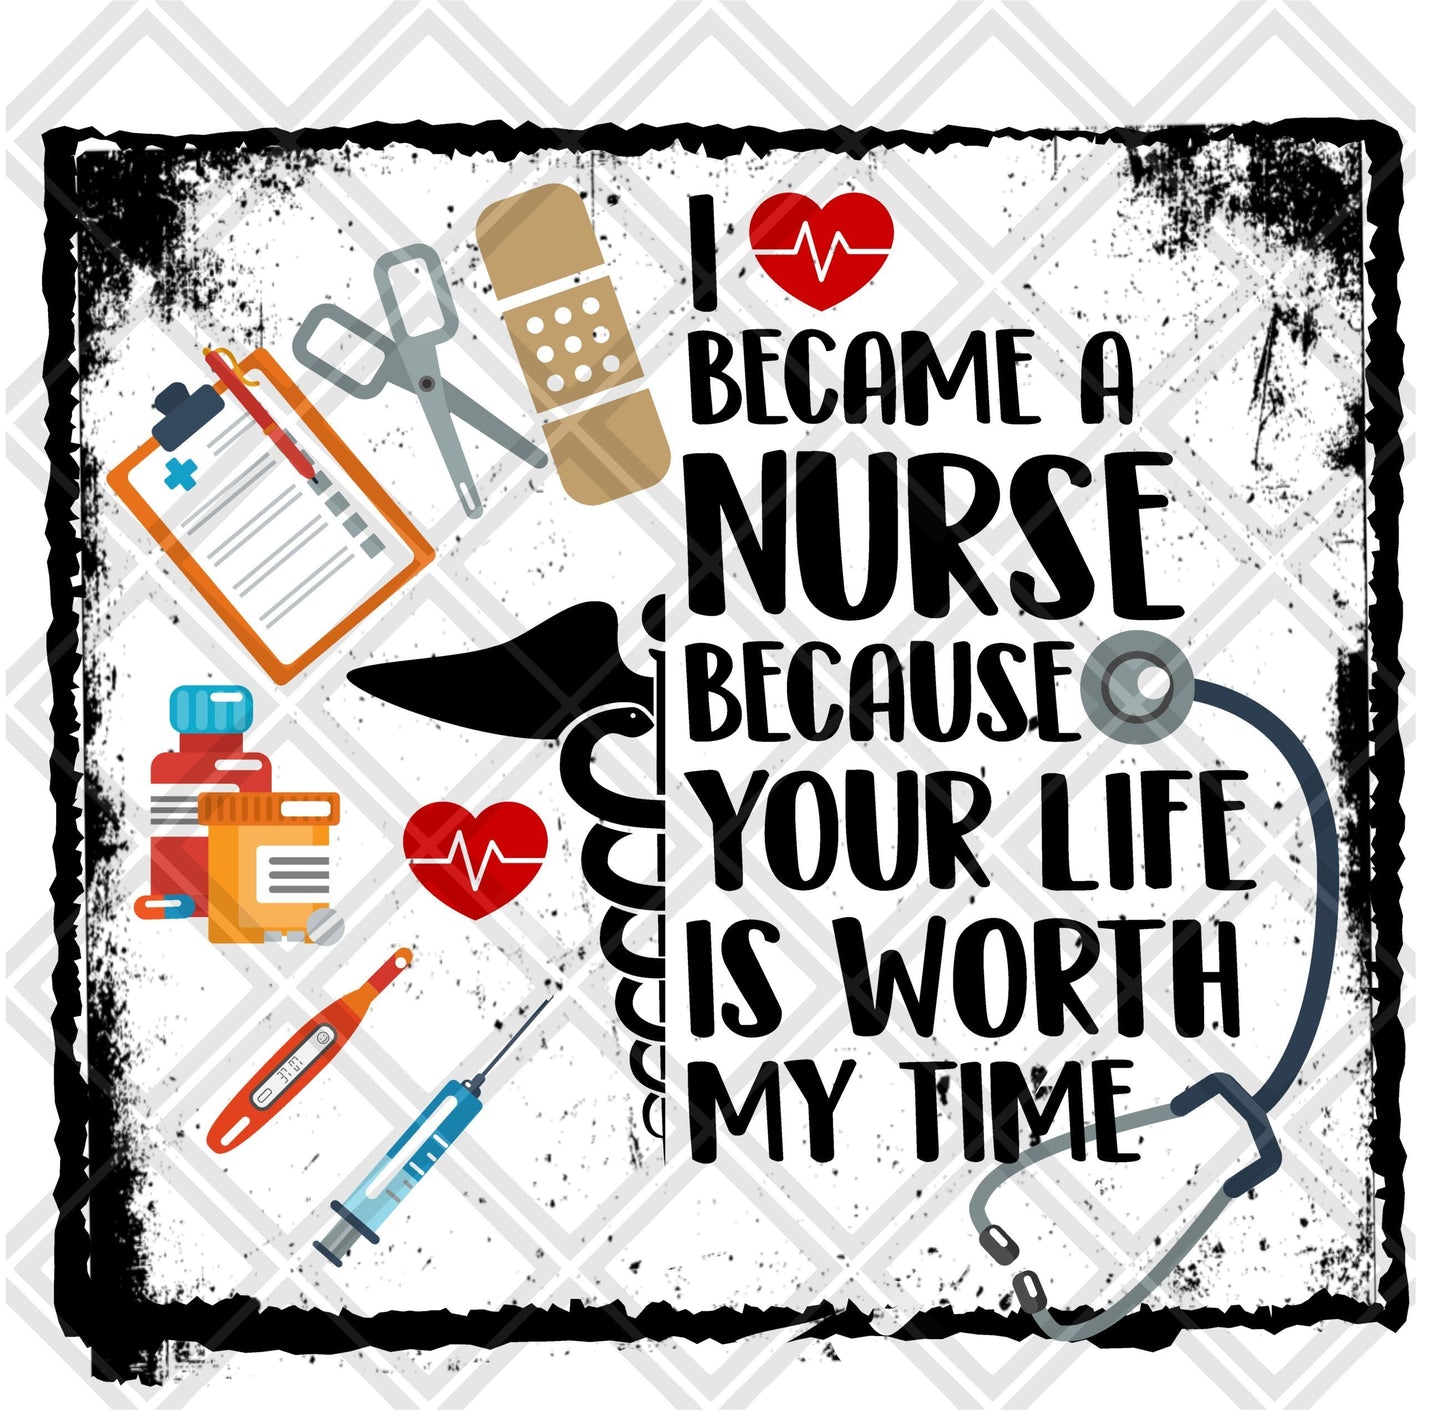 I Became A Nurse Because Your Life Is Worth My Time DTF TRANSFERPRINT TO ORDER